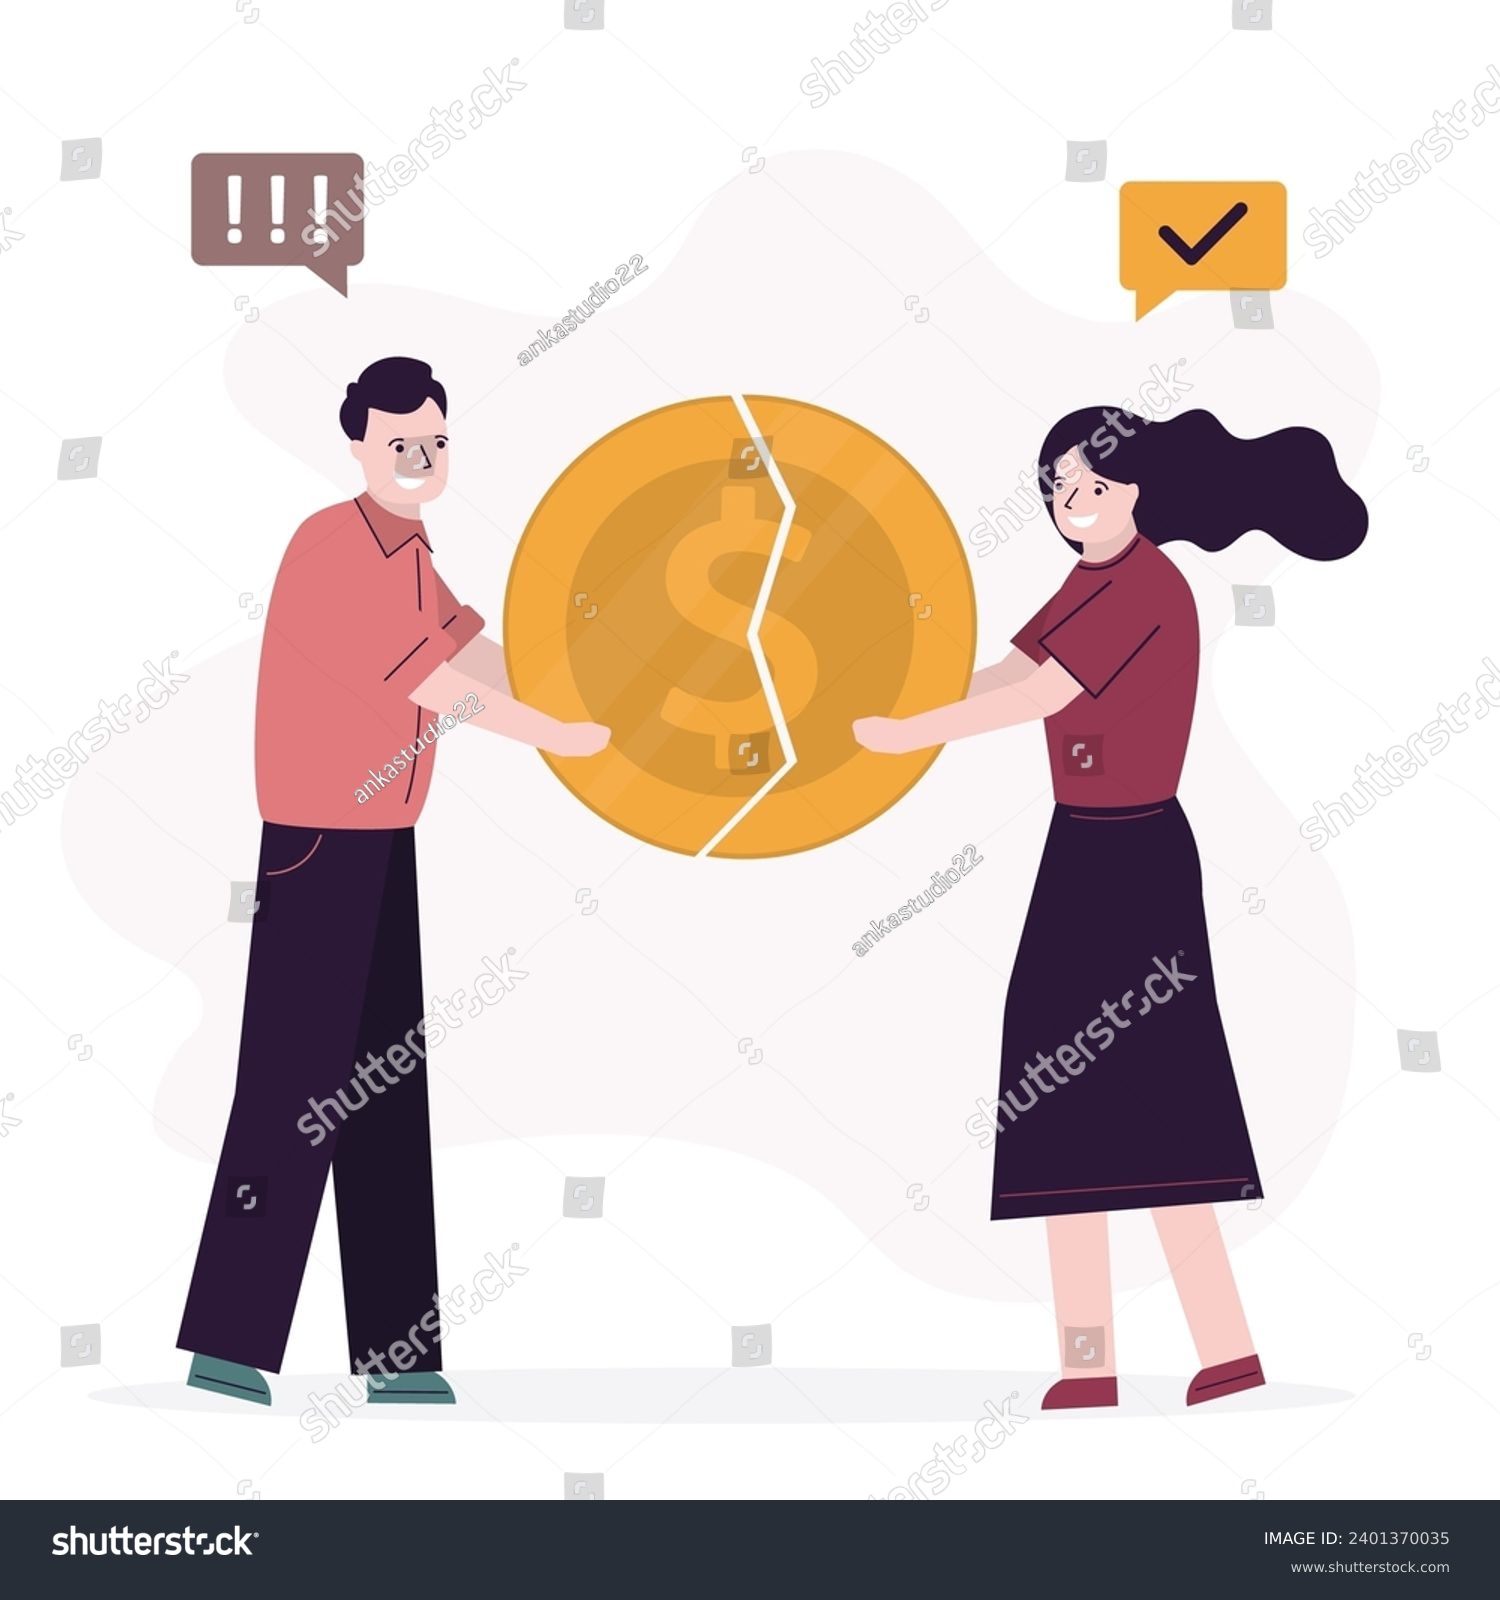 SVG of Couple connects parts of dollar coin, general budget, family finances. The co-founders add funding. Business development. vector illustration svg